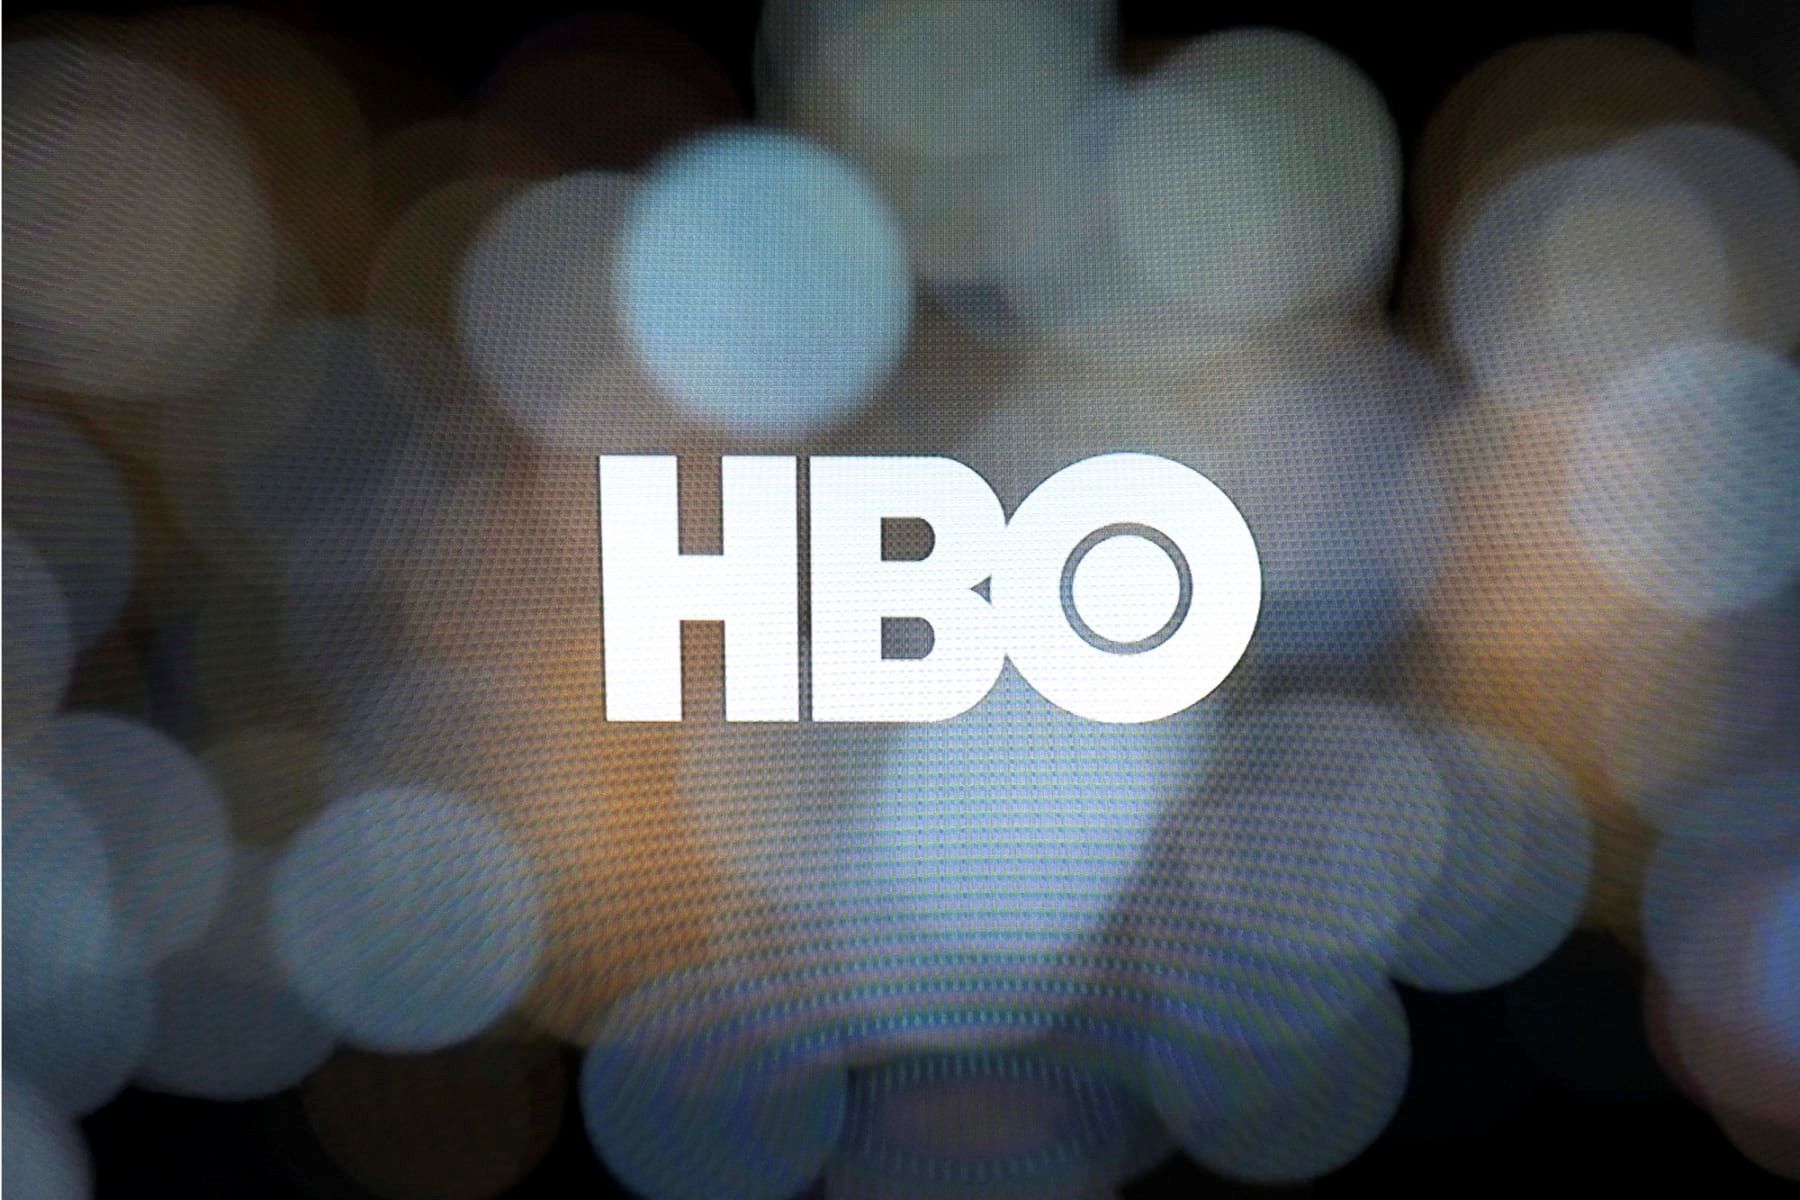 How To Watch Hbo Free